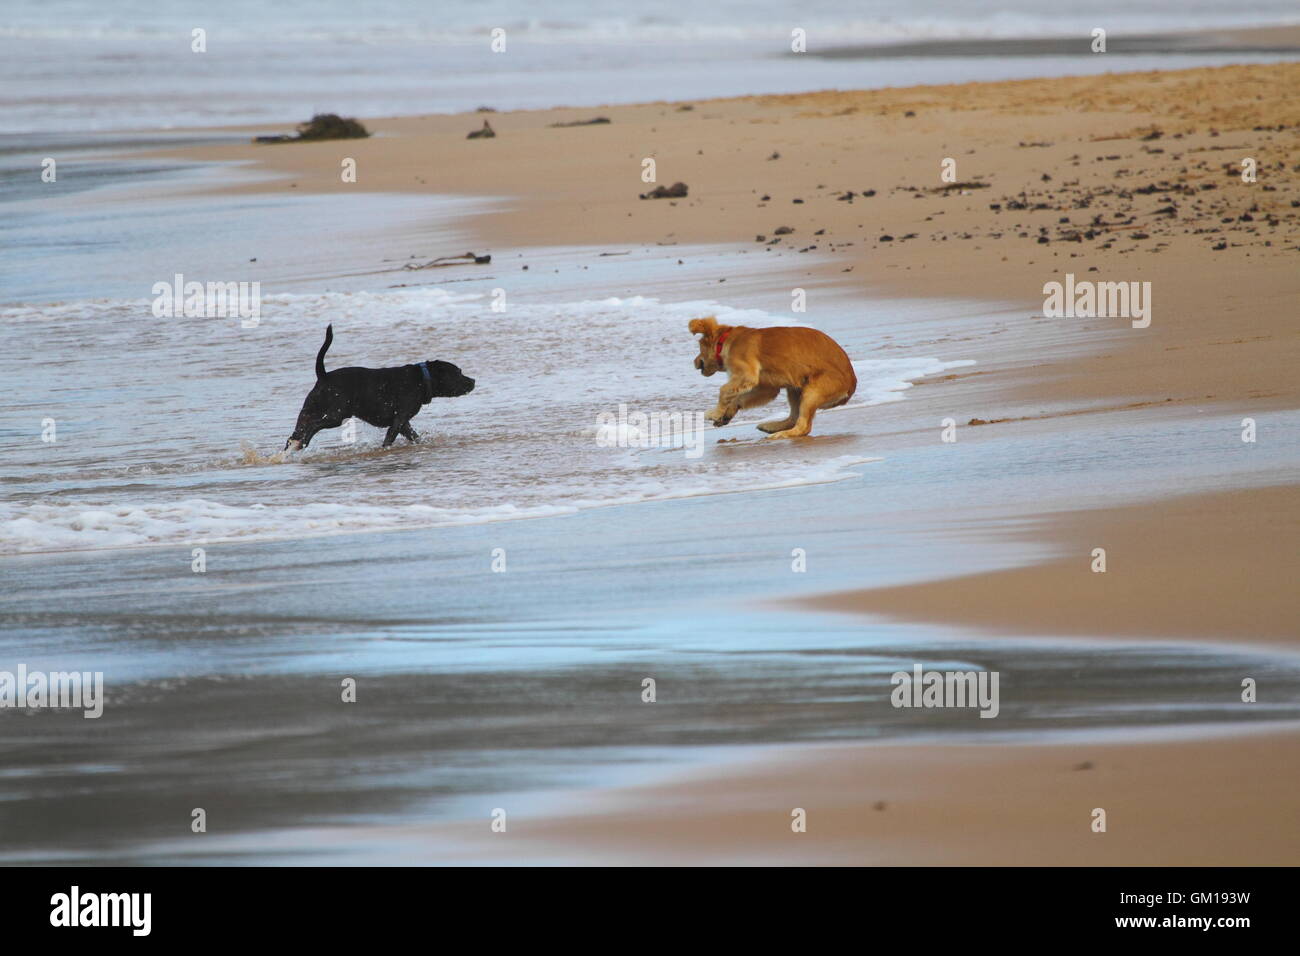 Two dogs playing in the water and sand on a beach in New South Wales, Australia. Stock Photo